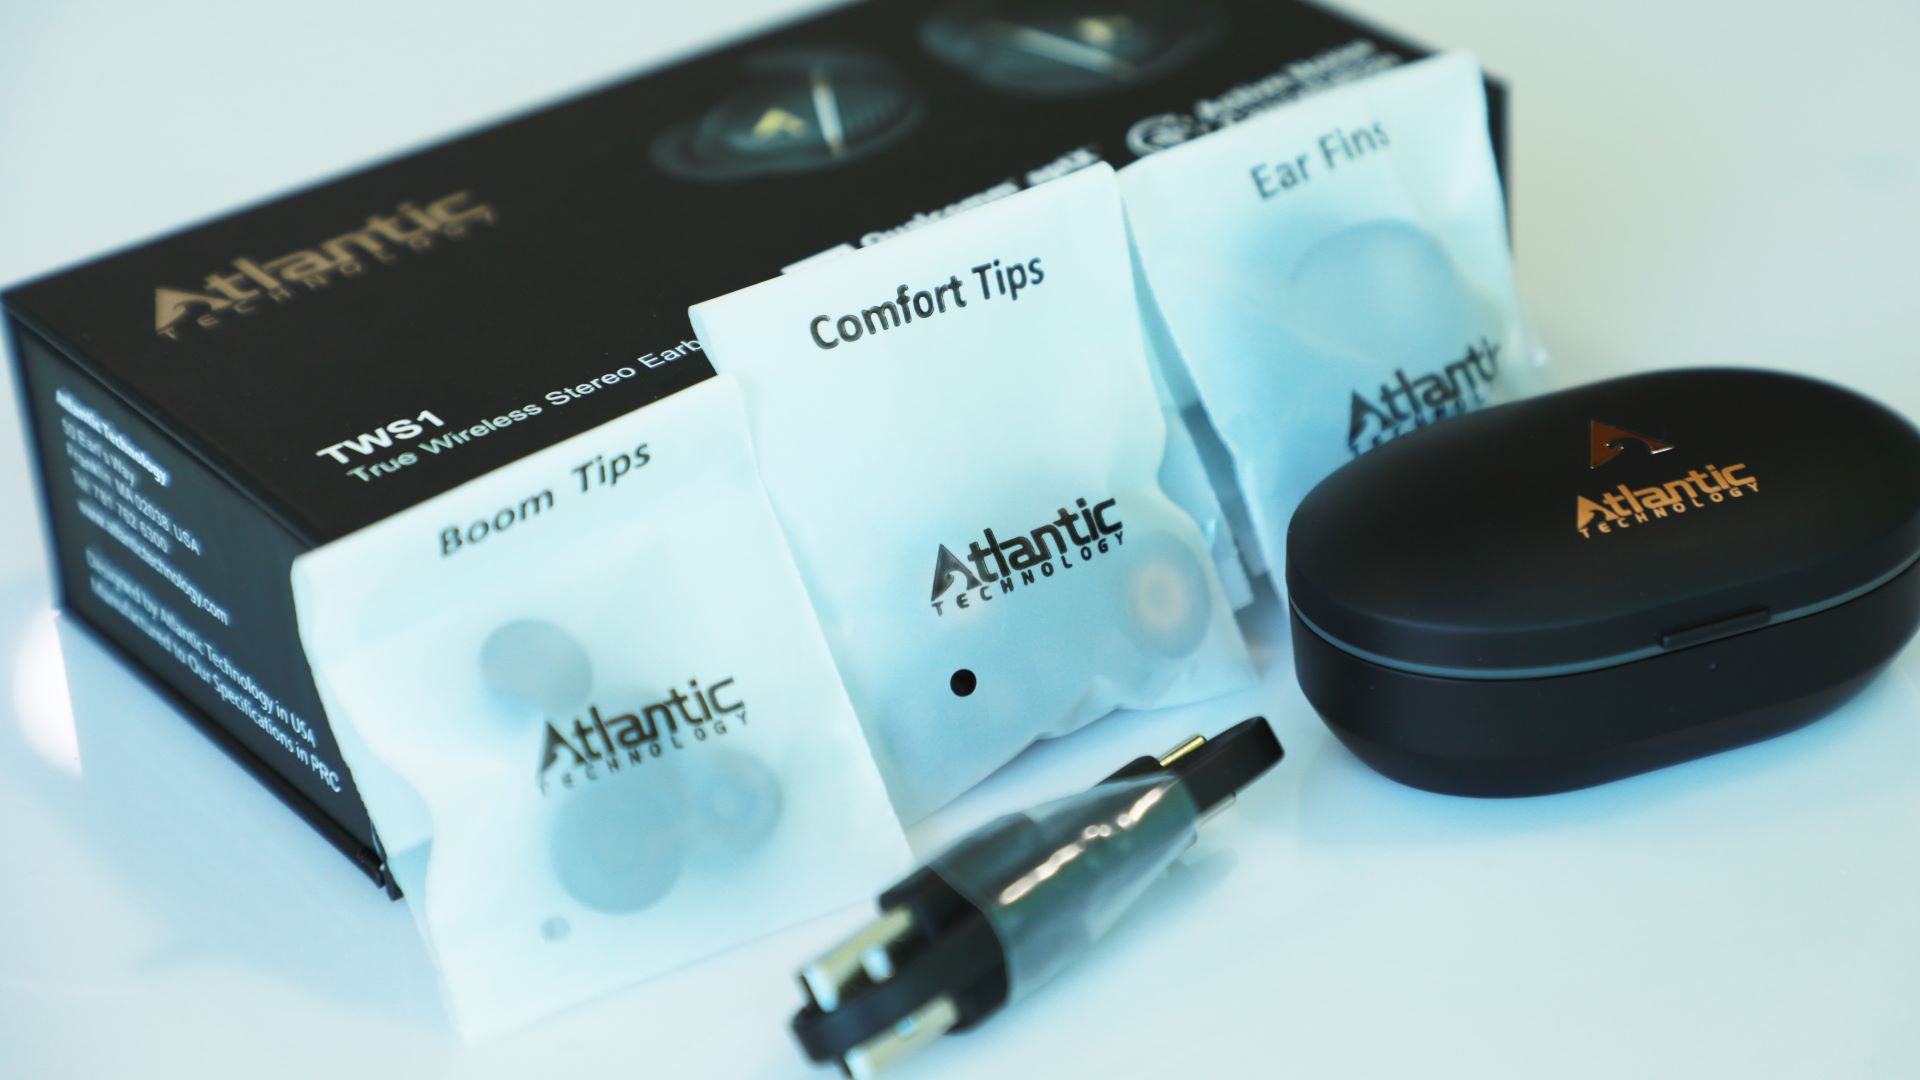 Atlantic Technology TWS1 earbuds and accessories on white background